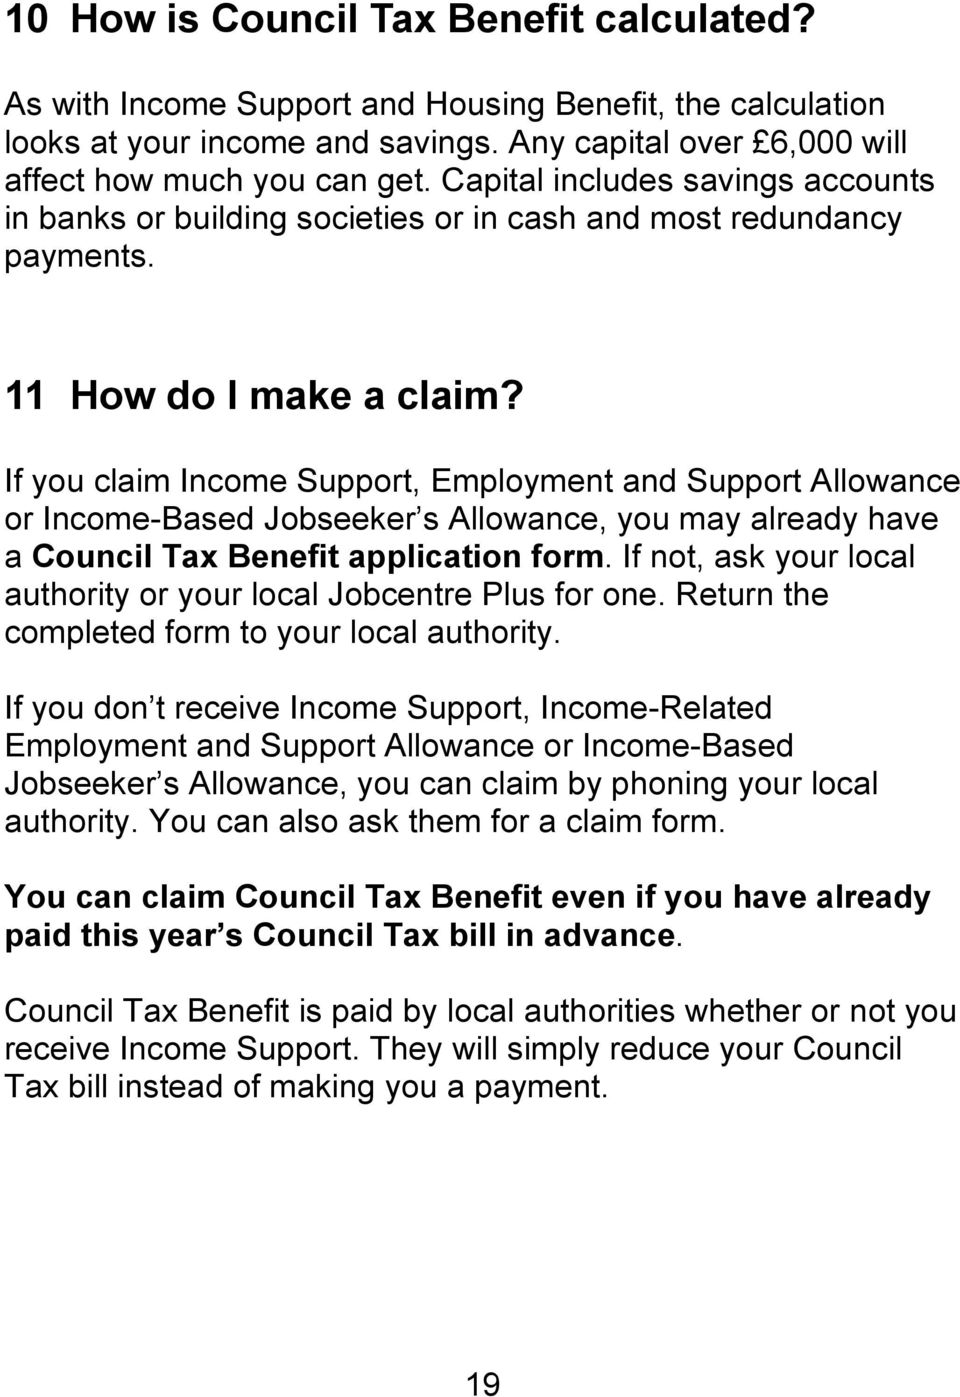 If you claim Income Support, Employment and Support Allowance or Income-Based Jobseeker s Allowance, you may already have a Council Tax Benefit application form.